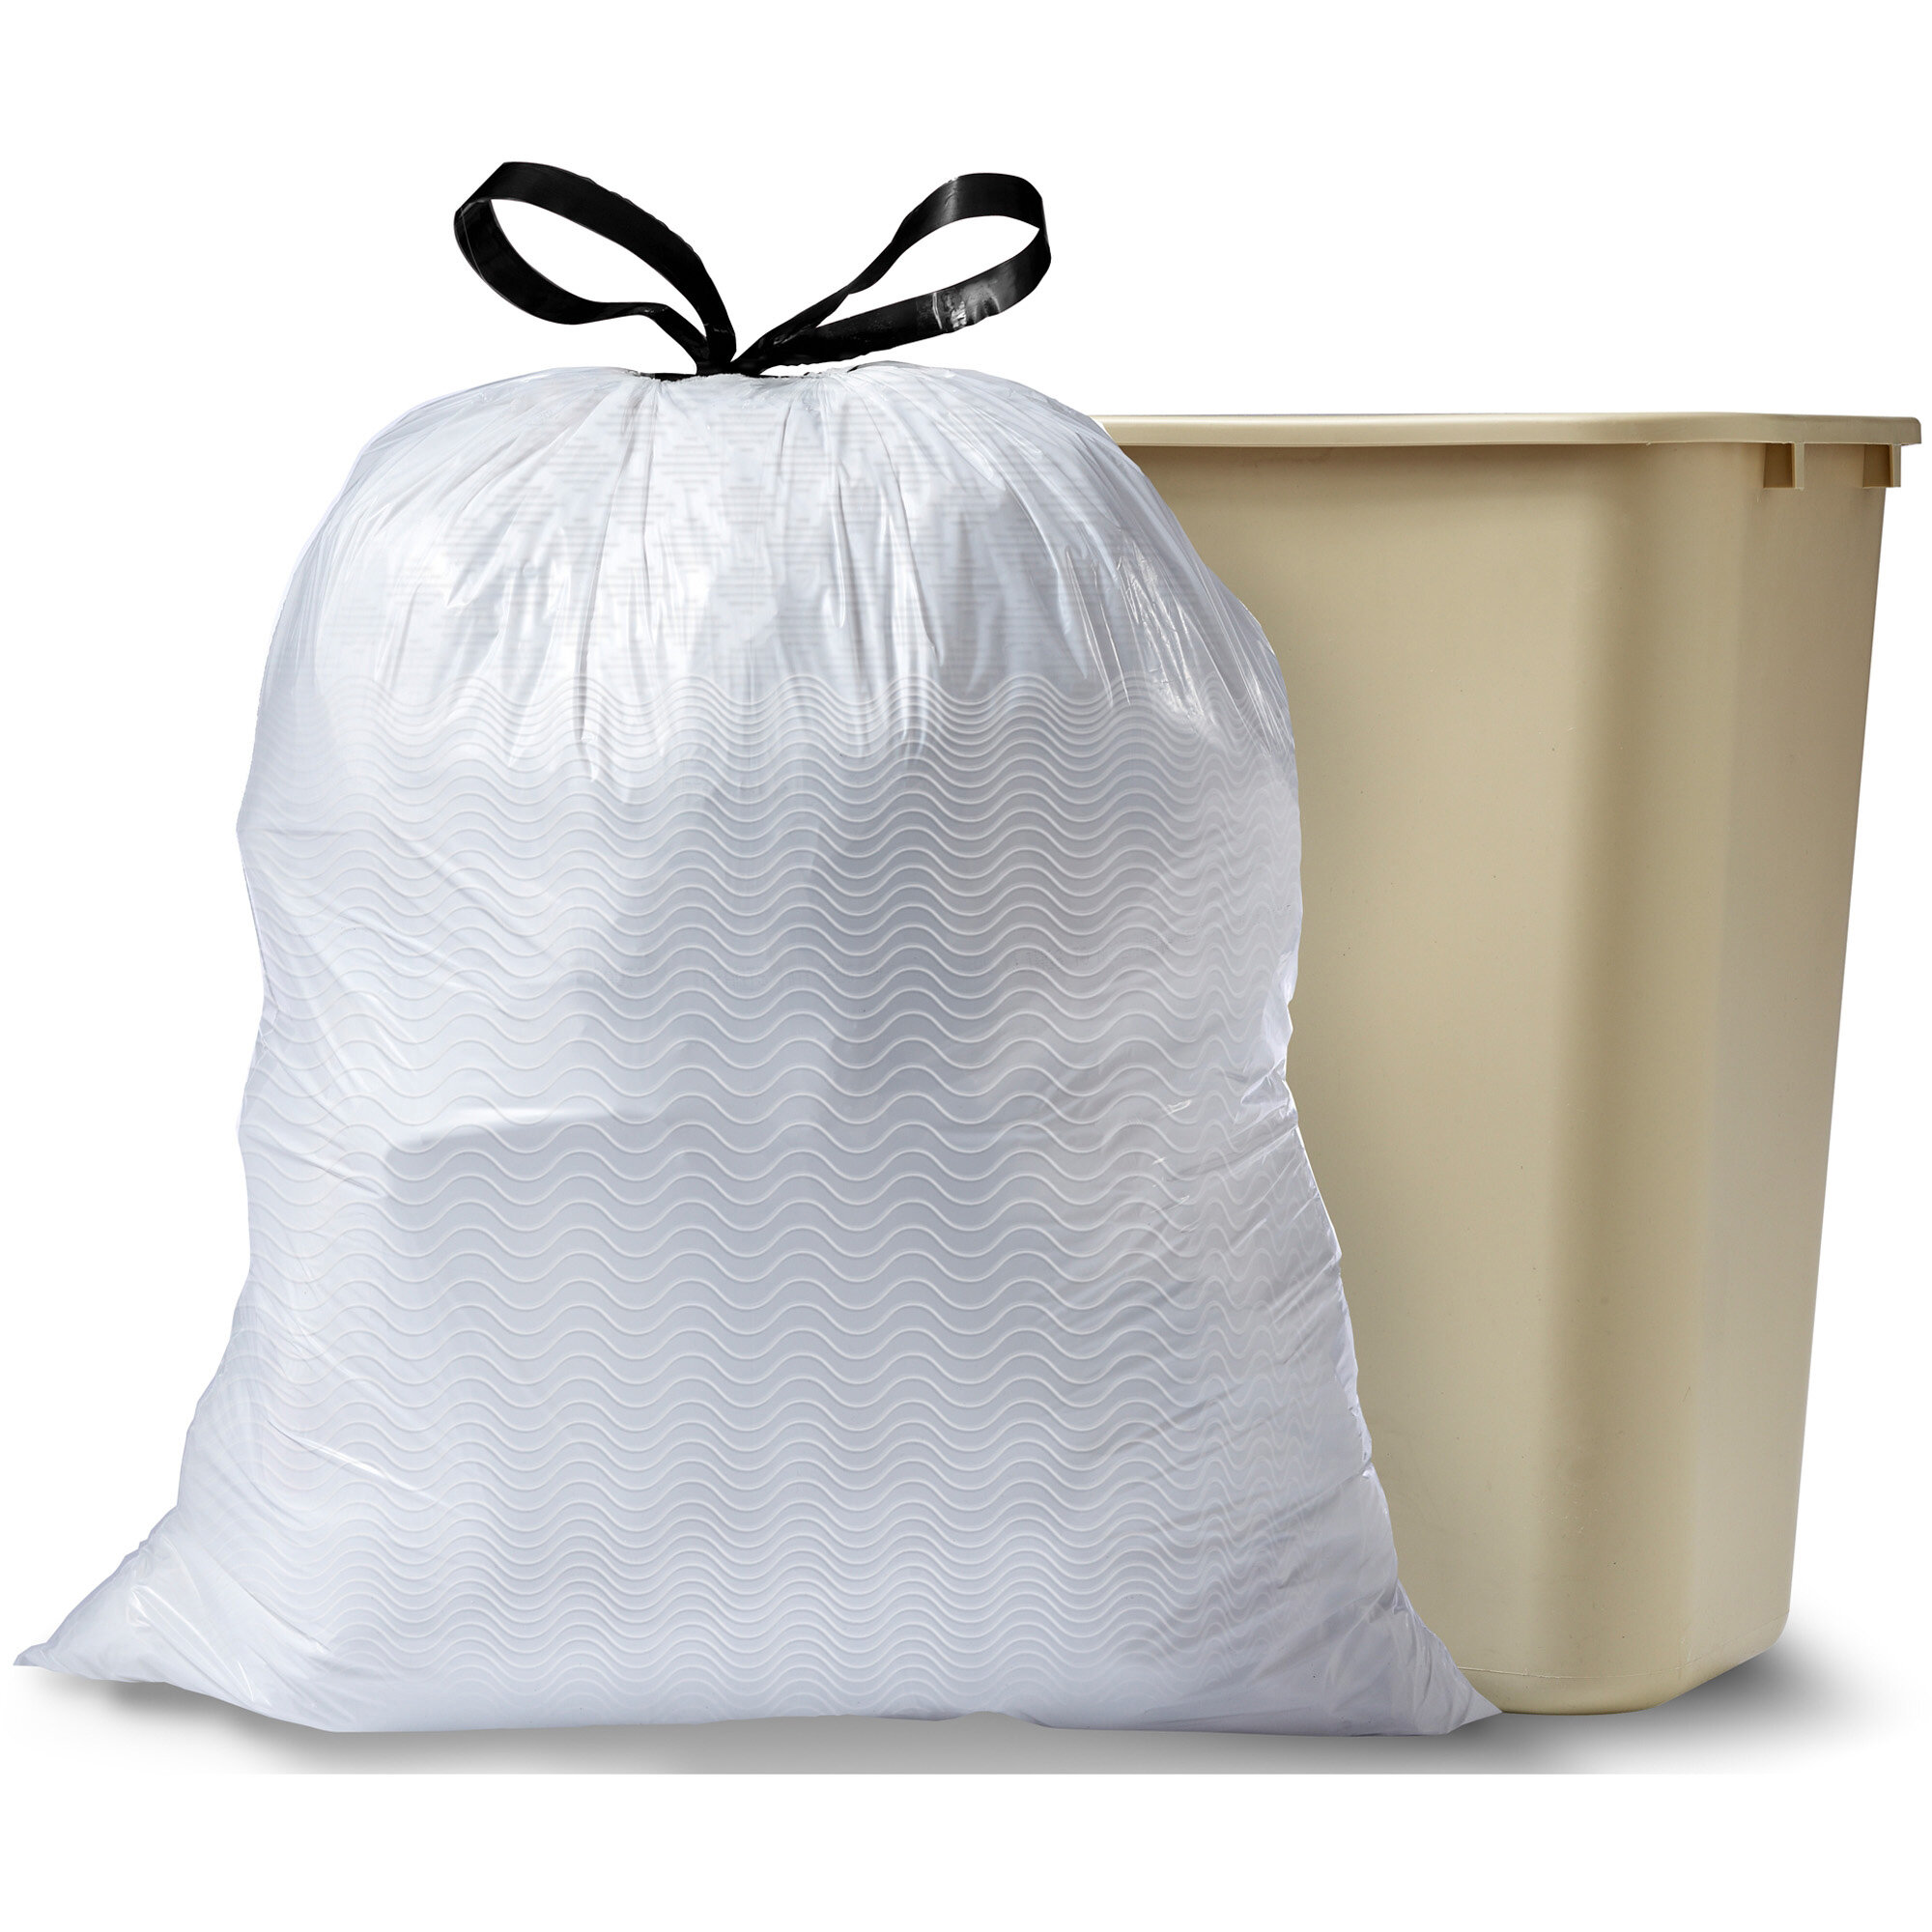 Field Day Tall Kitchen Trash Bags, 13 Gallon Size